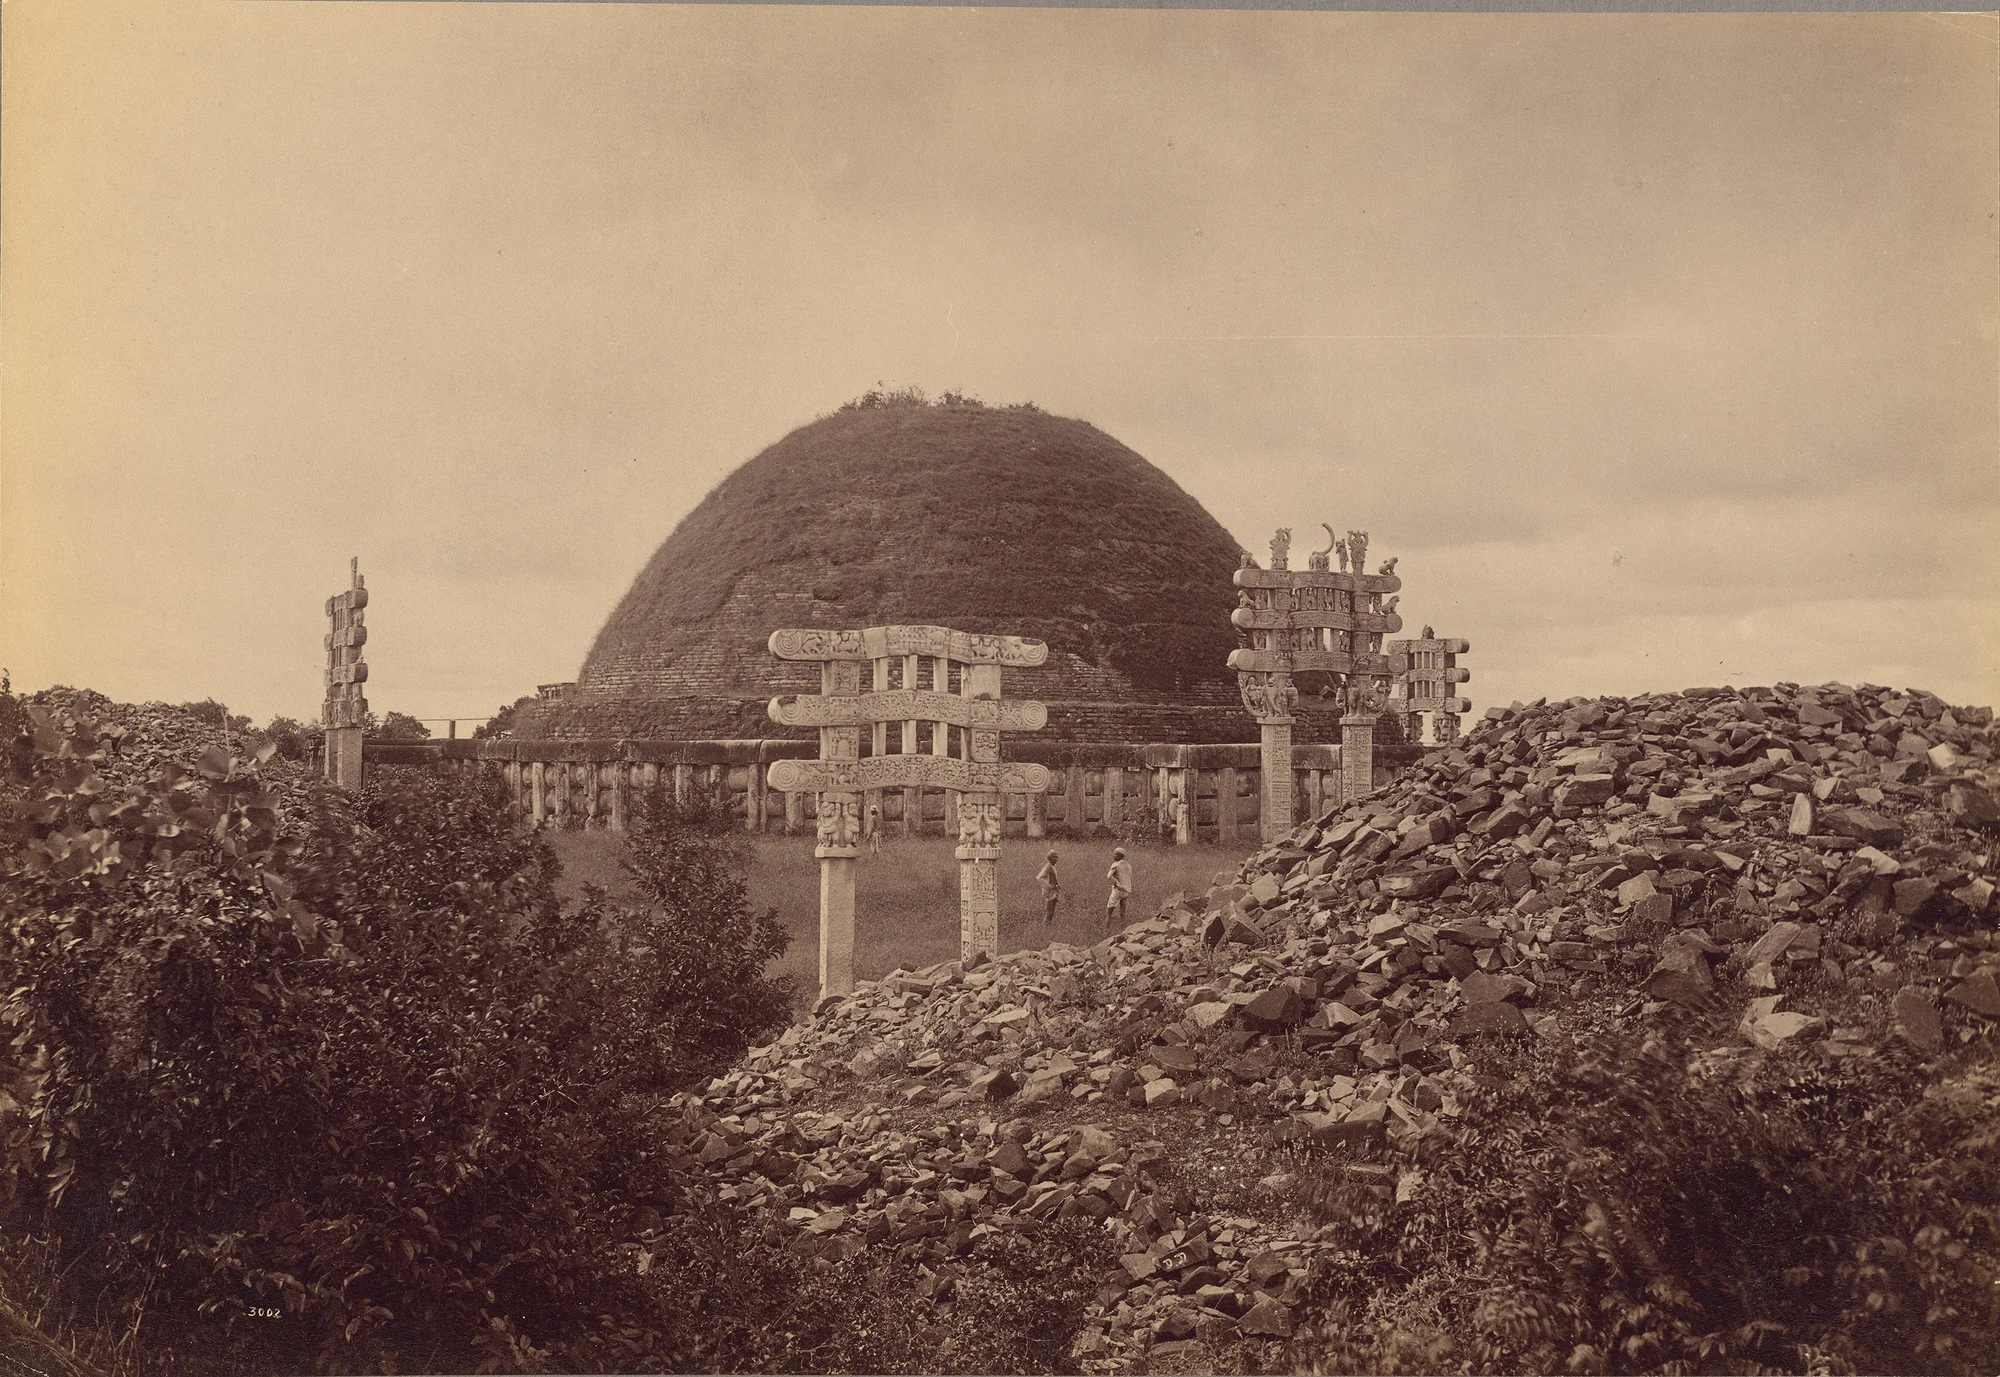 Black and white photograph of a large outdoor mound of earth, with tall stone edifices in front of it.